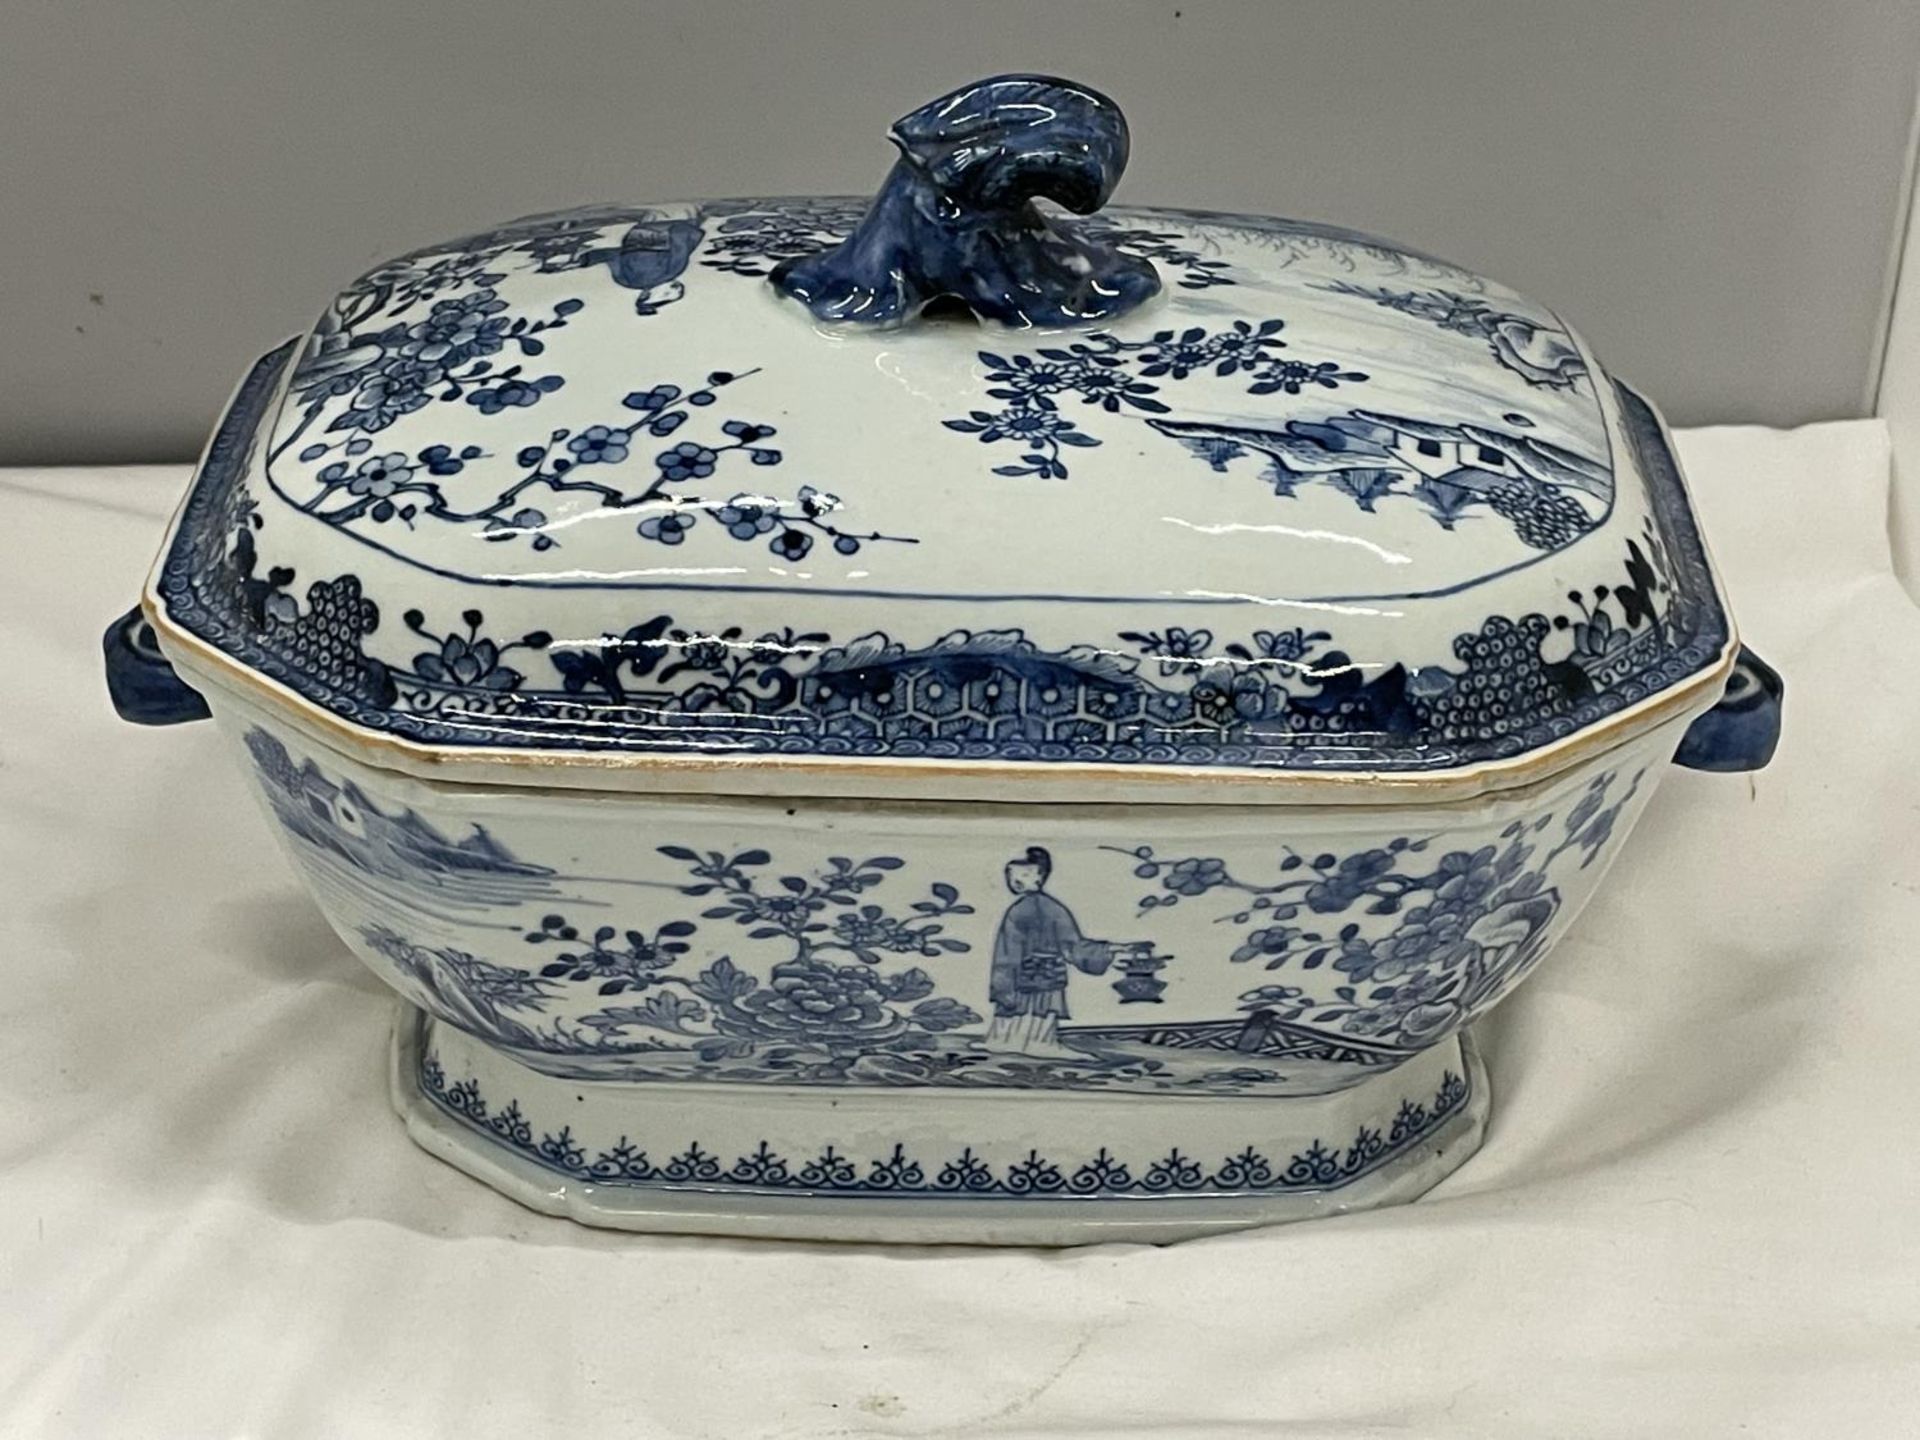 A BELIEVED TO BE LATE 18TH/EARLY 19TH CENTURY CHINESE QING DYNASTY/NANKIN BLUE AND WHITE LARGE - Image 6 of 9